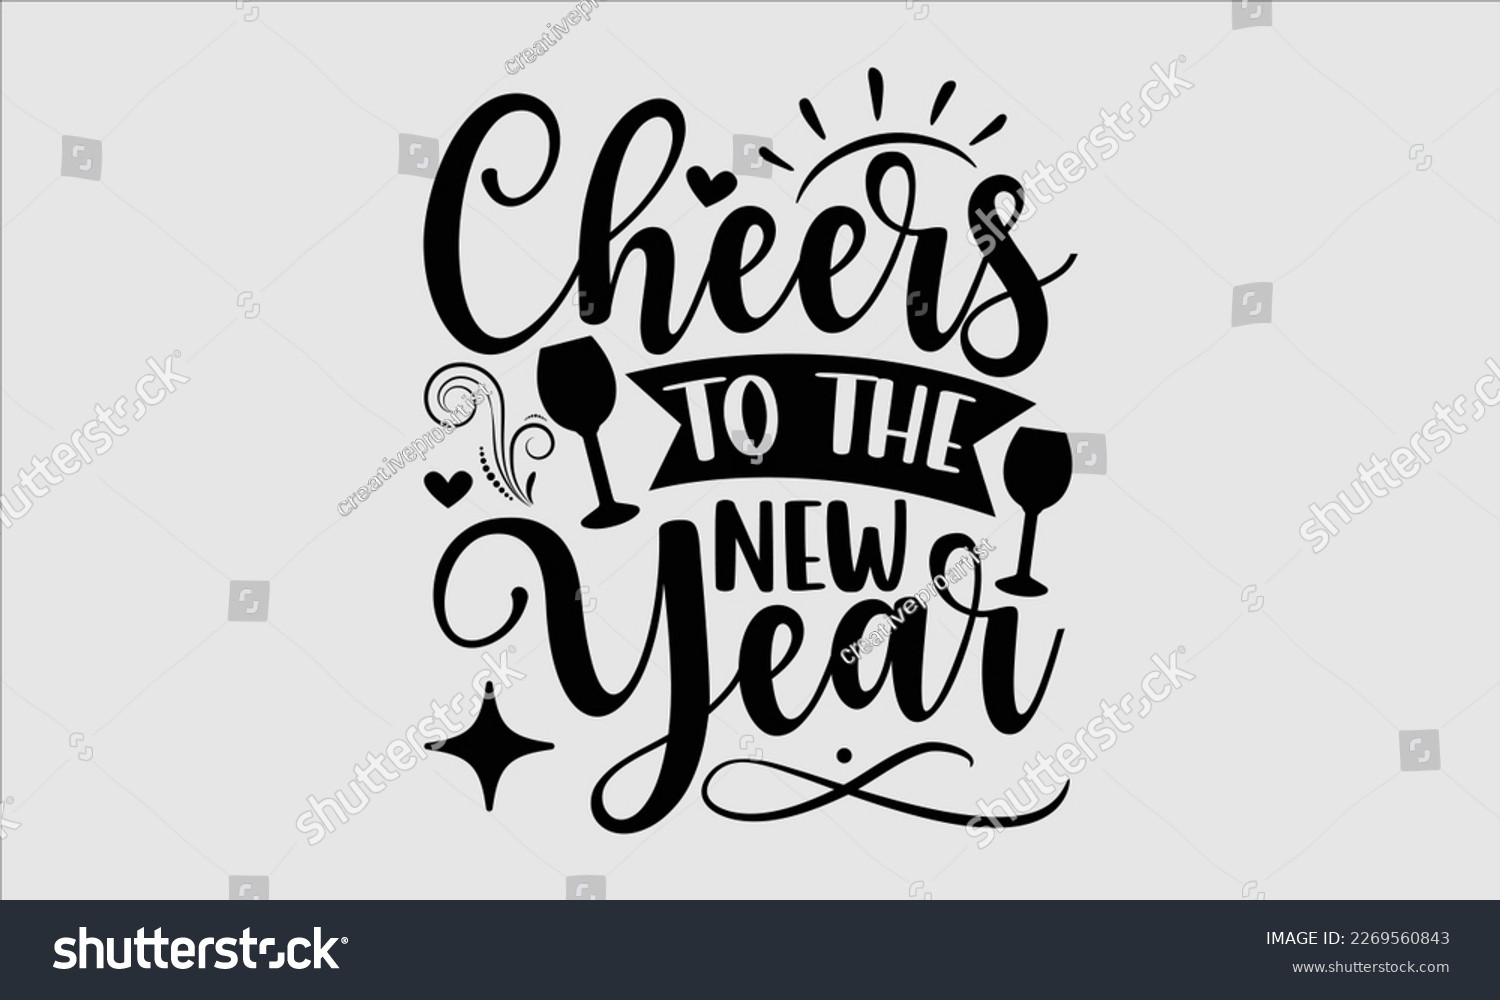 SVG of Cheers To The New Year- Happy New Year t shirt Design, lettering vector illustration isolated on white background, gift and other printing Svg and bags, posters. eps 10 svg